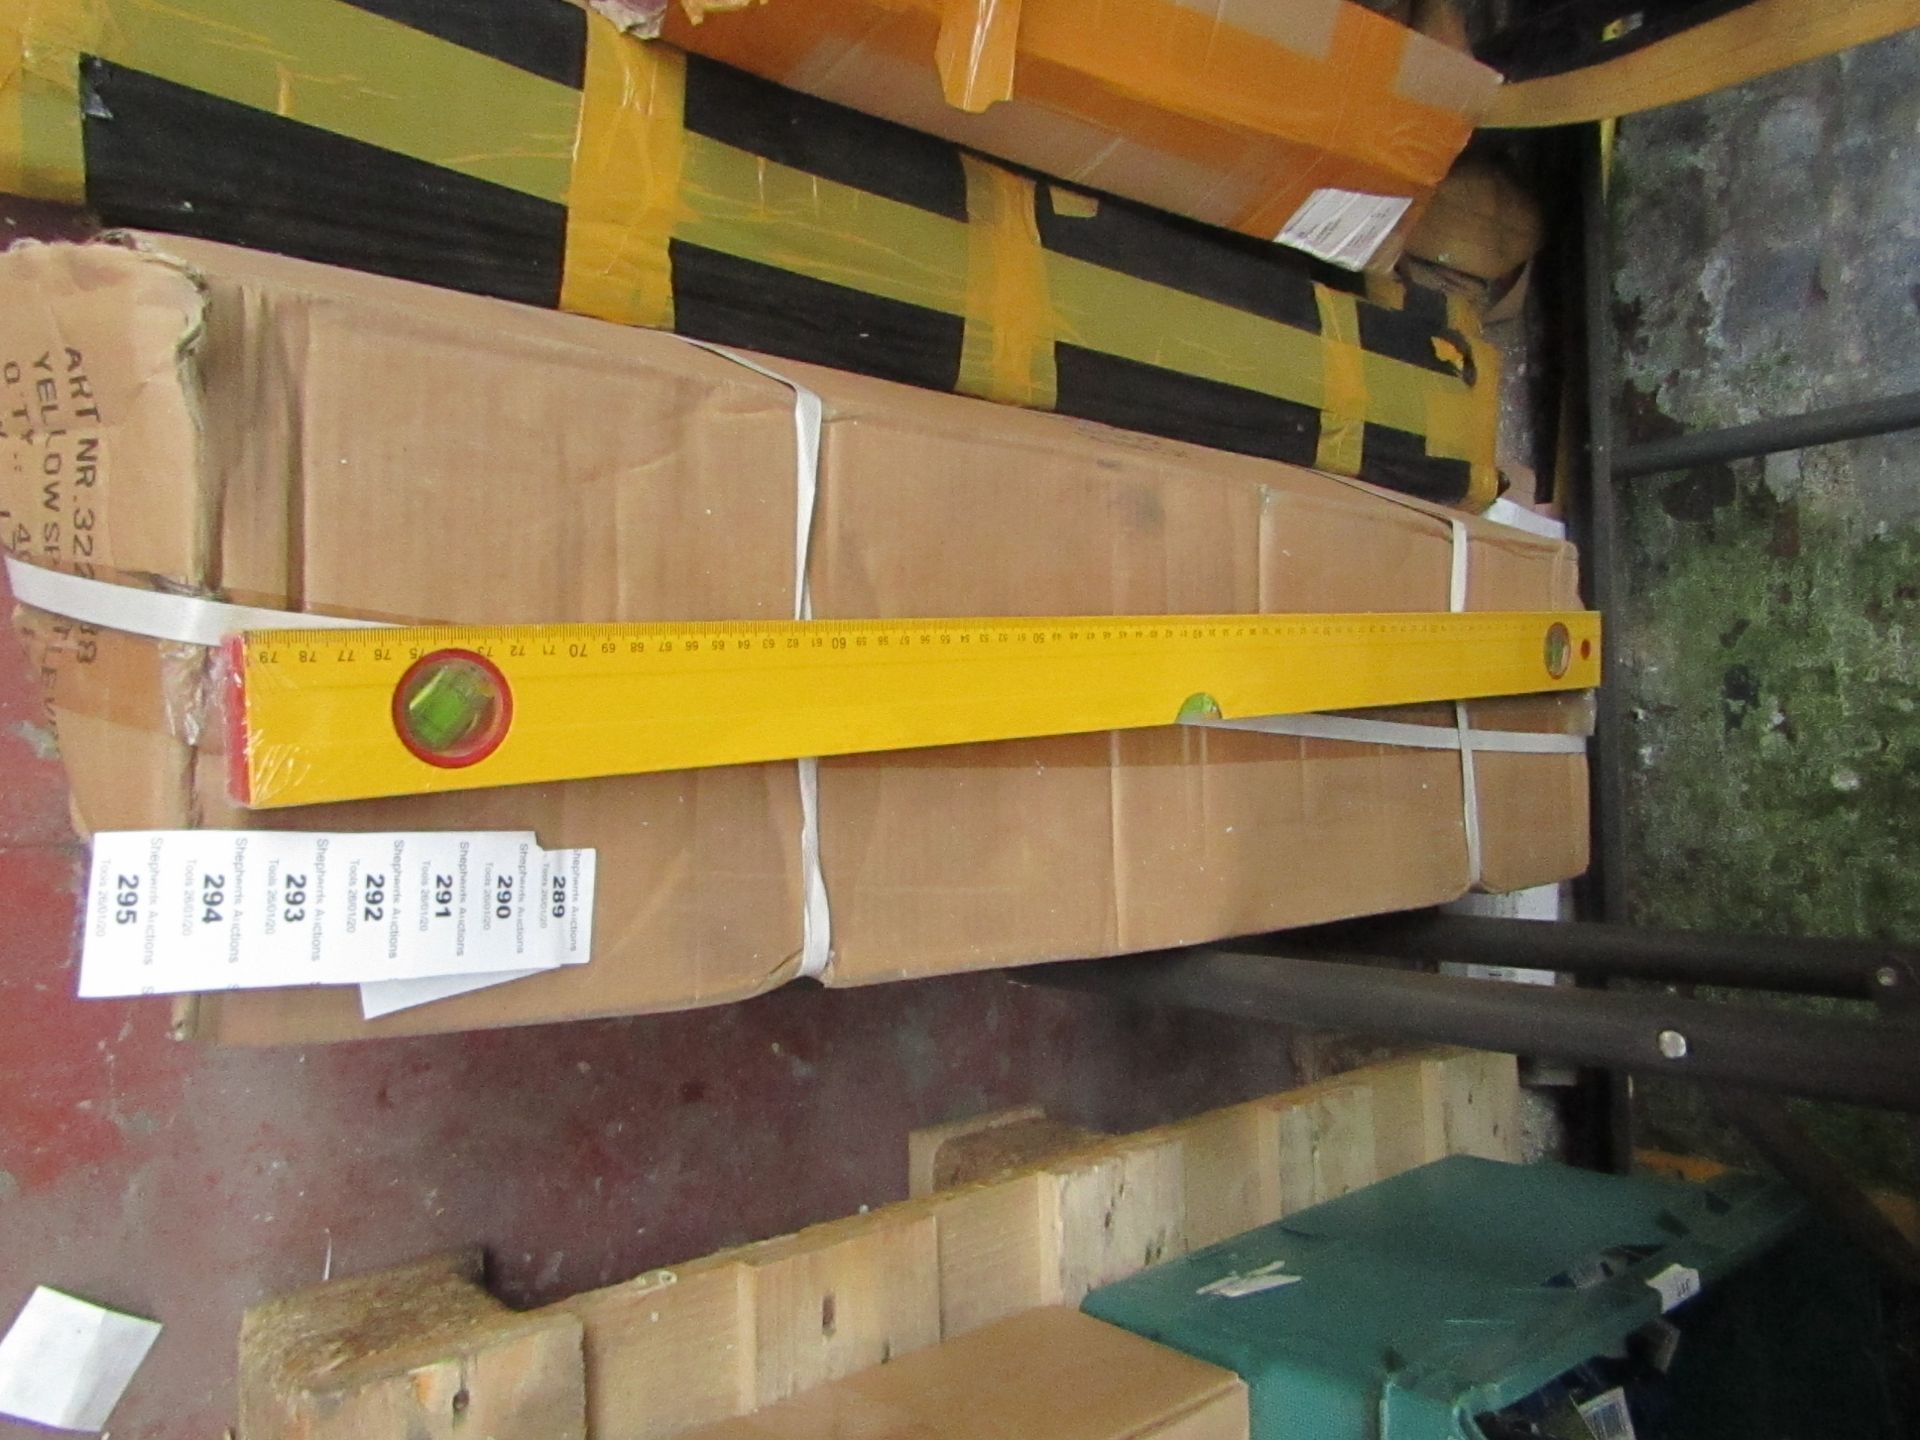 80cm Ruler with spirit level, new and factory sealed.